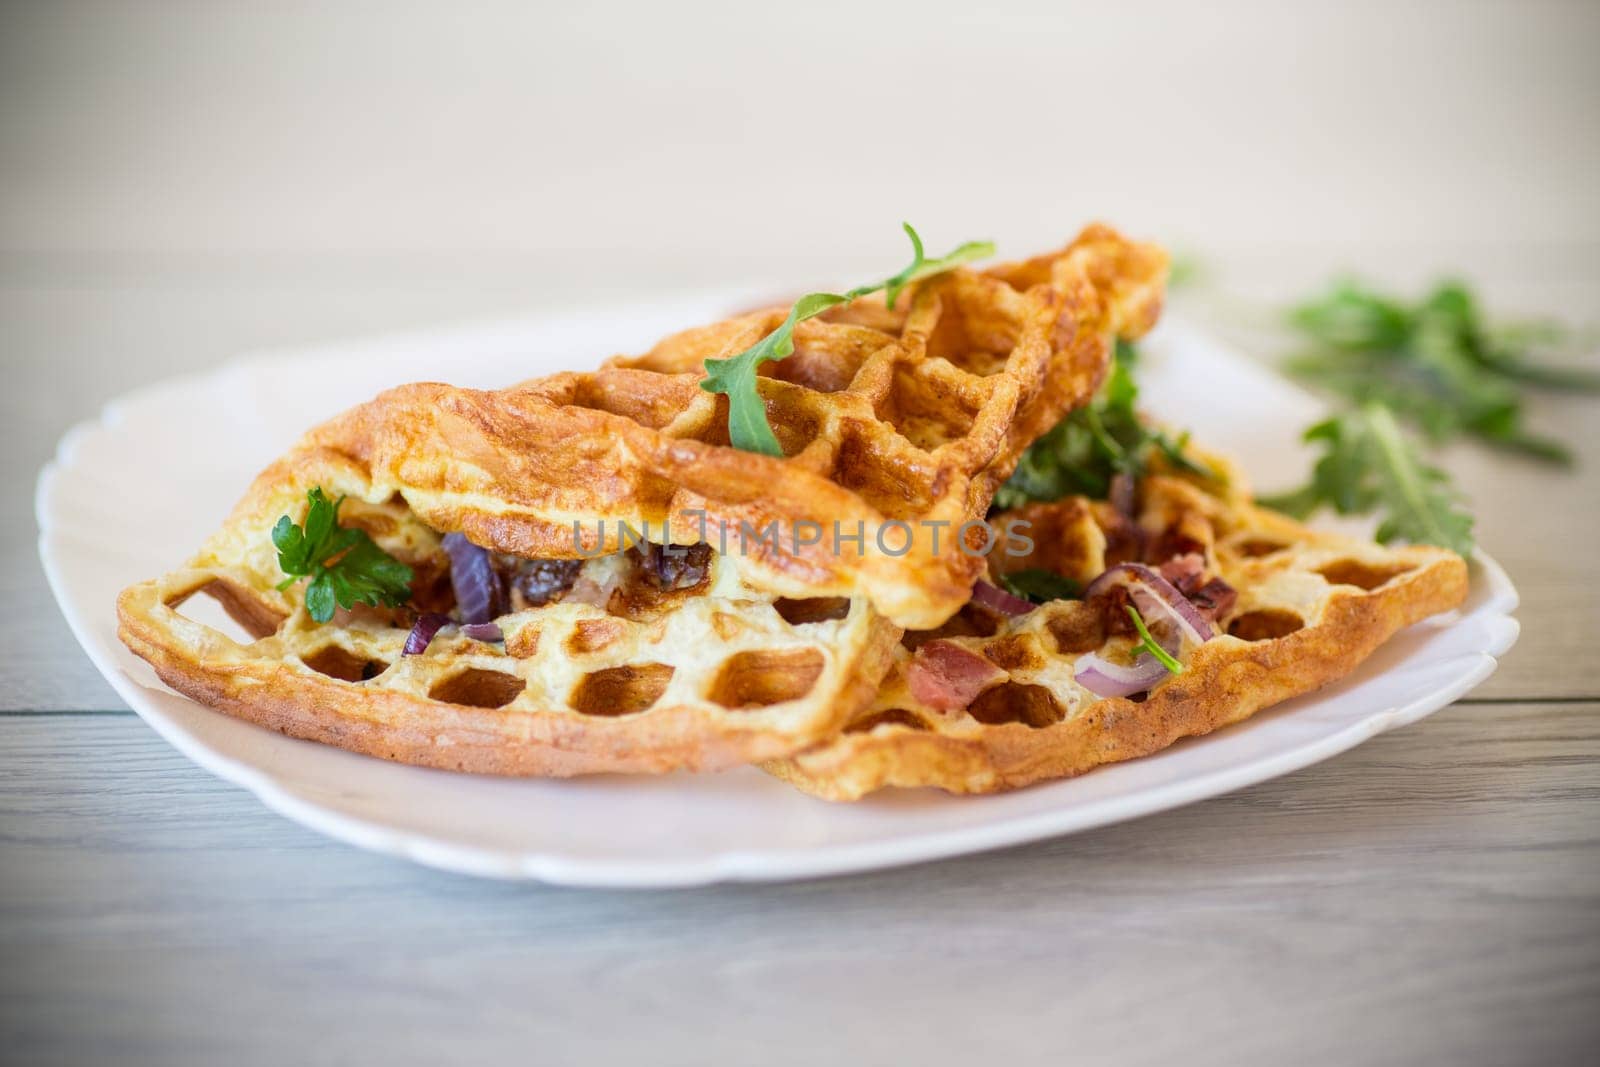 Egg omelette stuffed with onions and herbs, fried in the form of waffles, on a wooden table